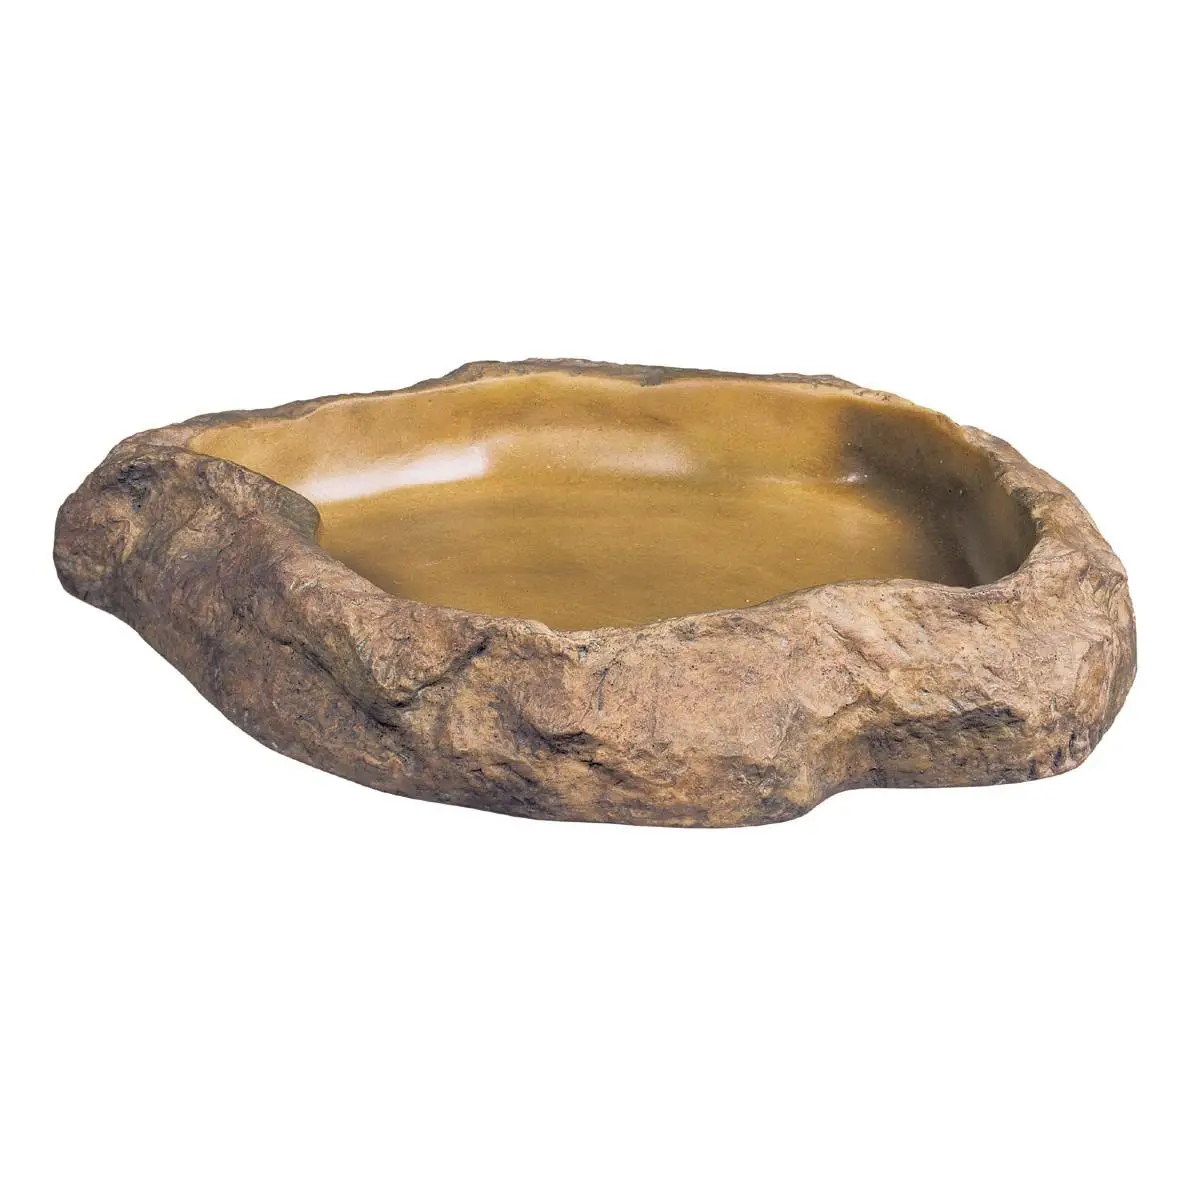 Water Bowls for reptile